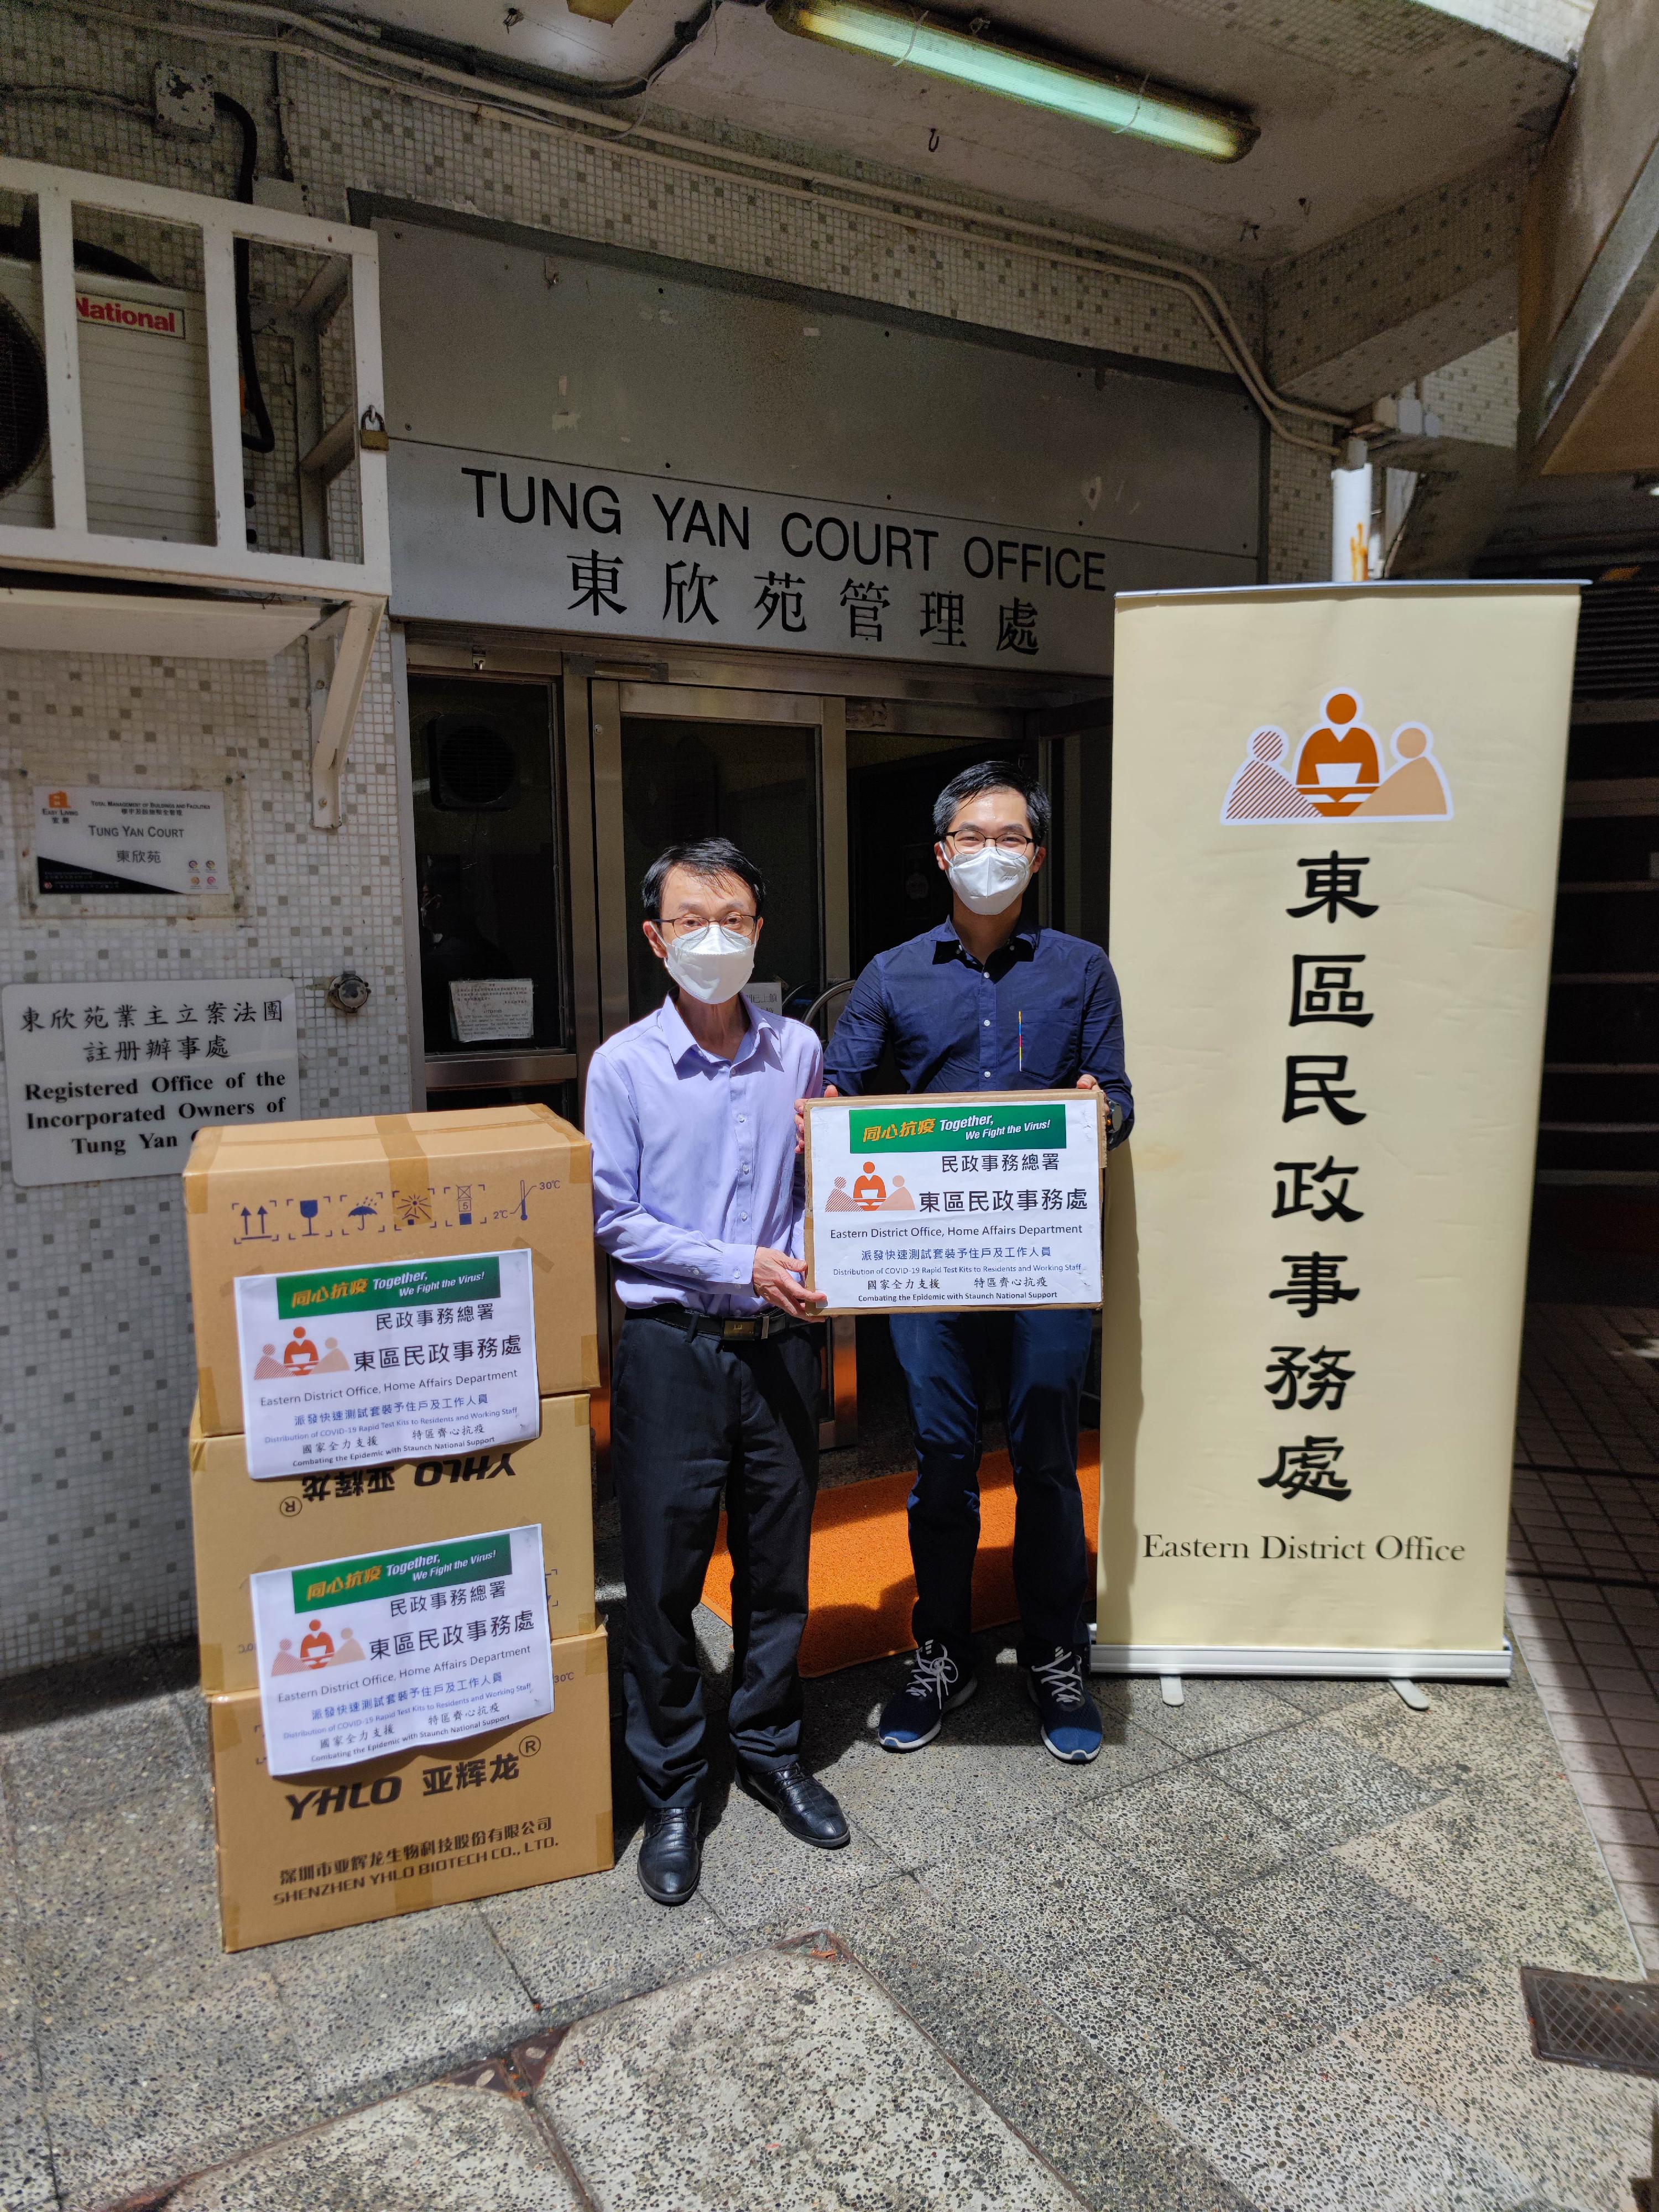 The Eastern District Office today (May 30) distributed COVID-19 rapid test kits to households, cleansing workers and property management staff living and working in Tung Yan Court for voluntary testing through the property management company.